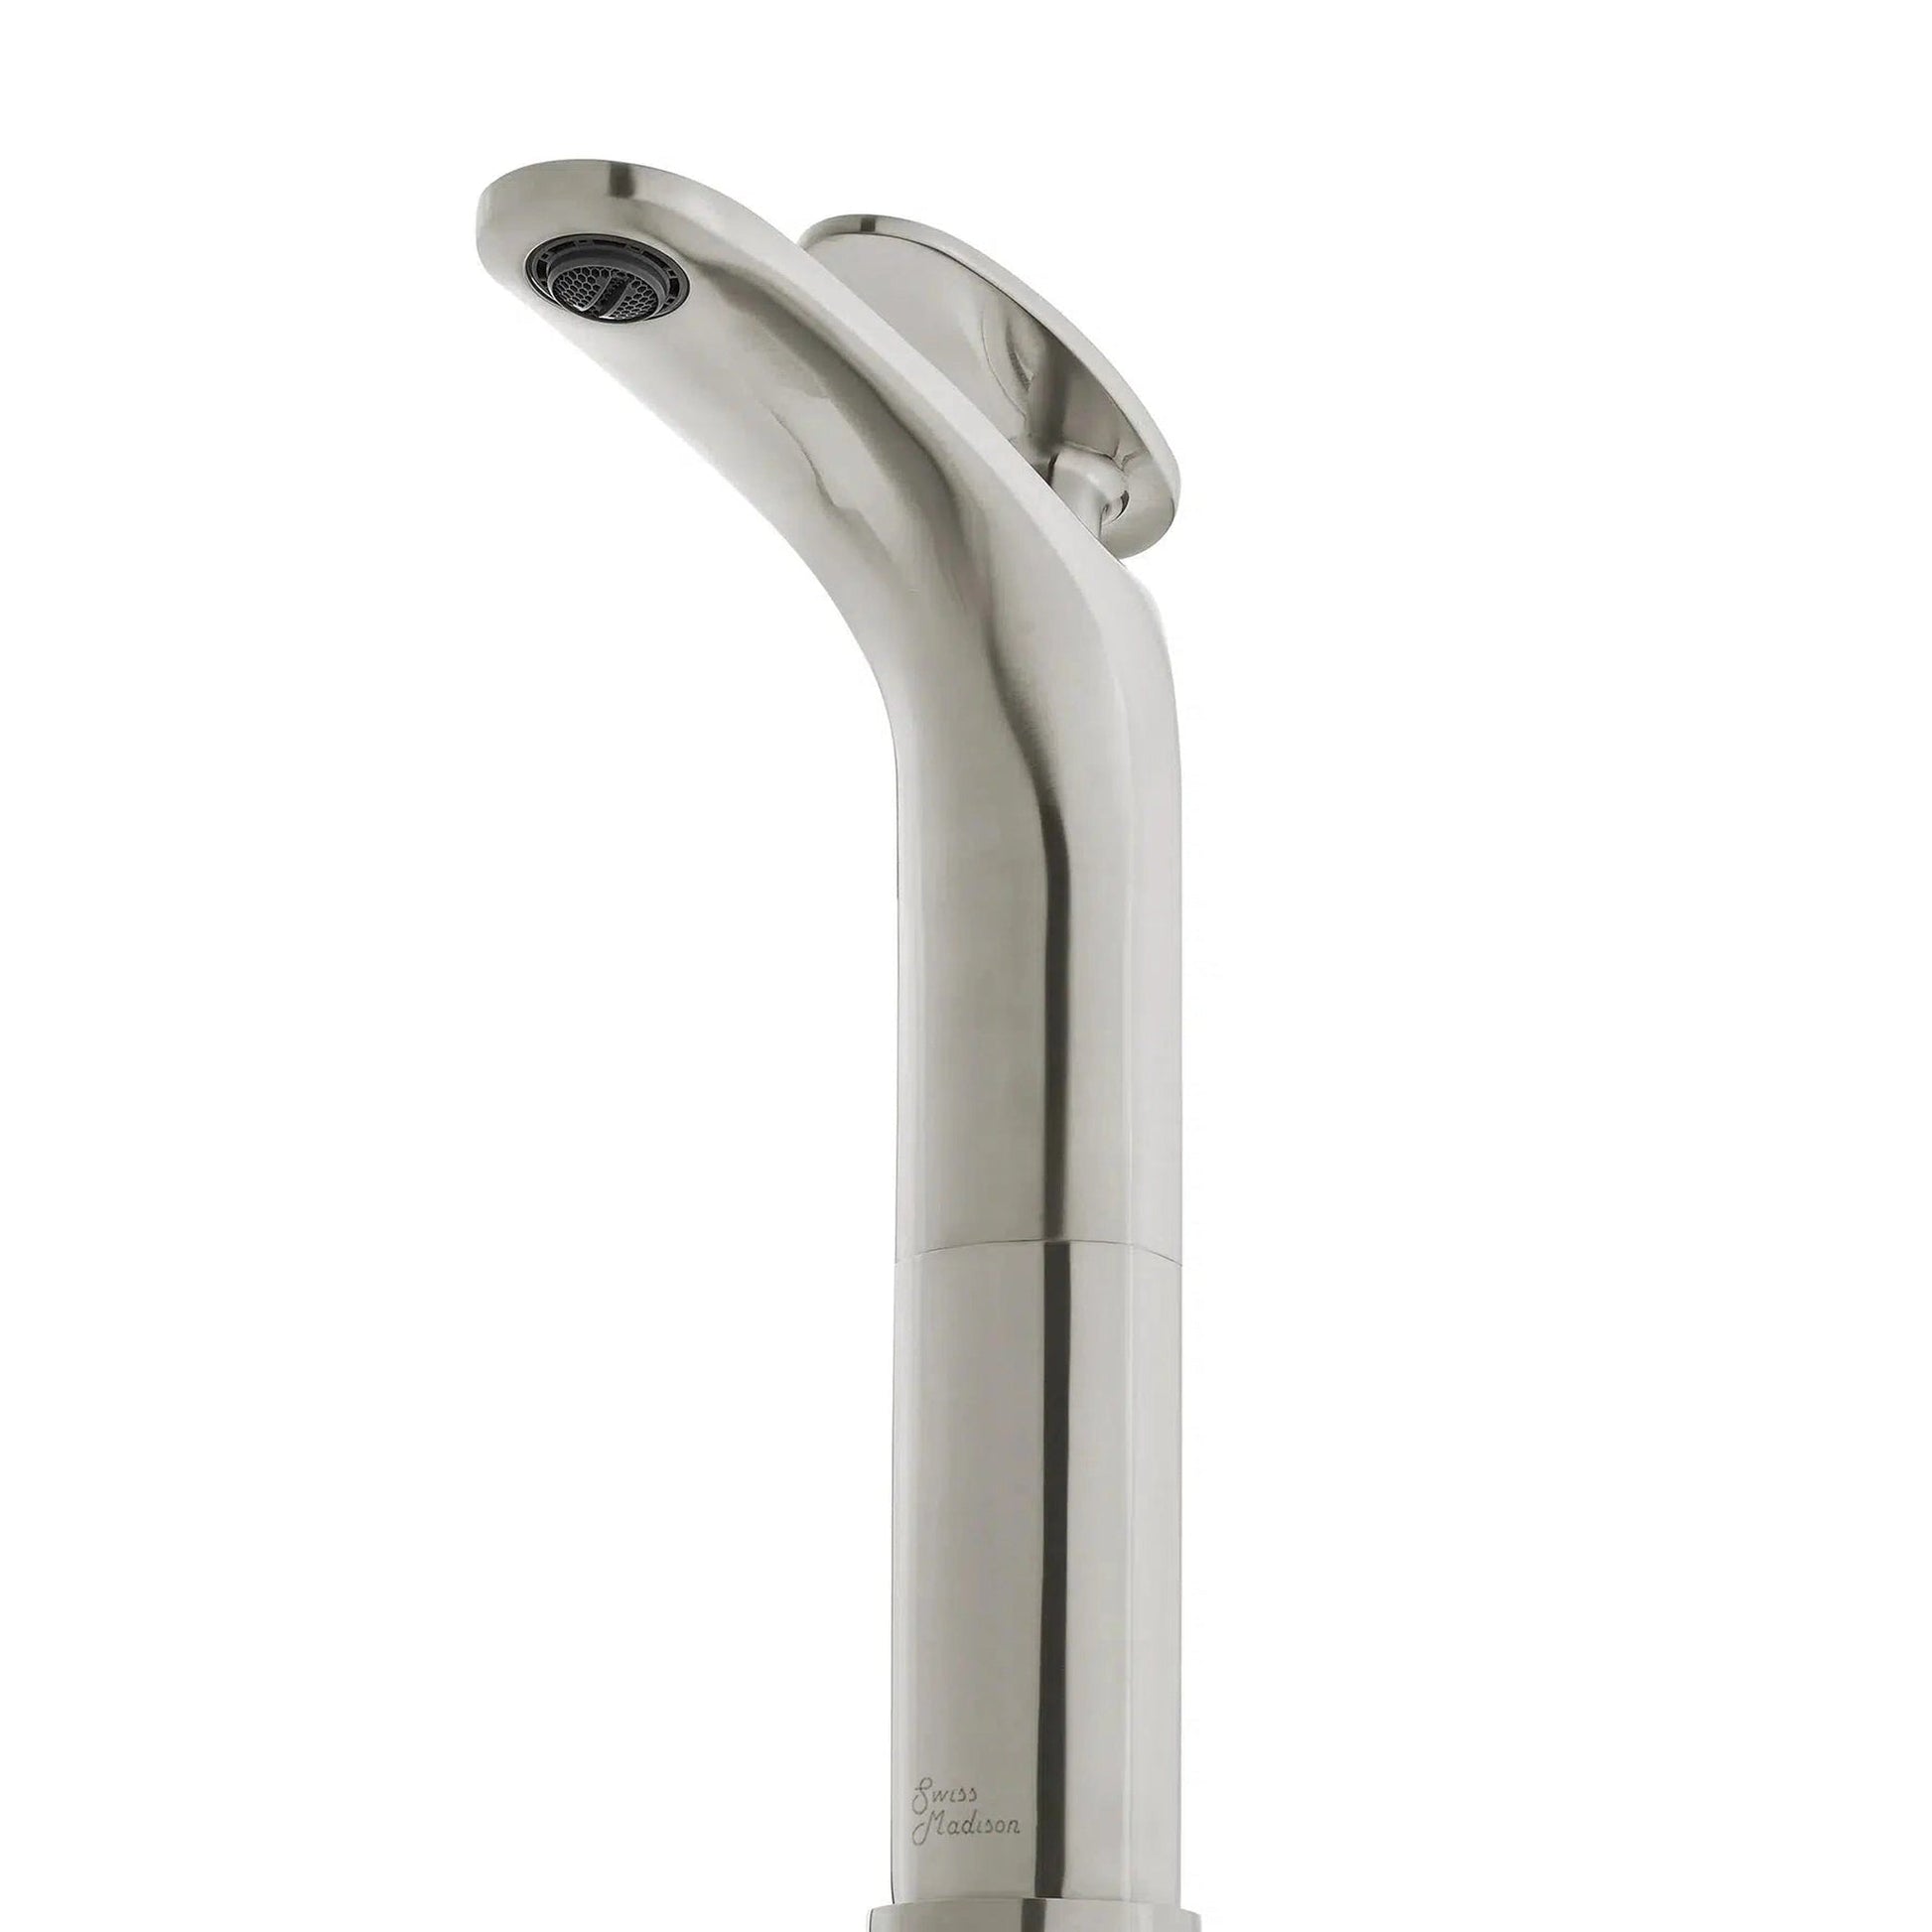 Swiss Madison Sublime 11" Brushed Nickel Single Hole Bathroom Faucet With Flow Rate of 1.2 GPM